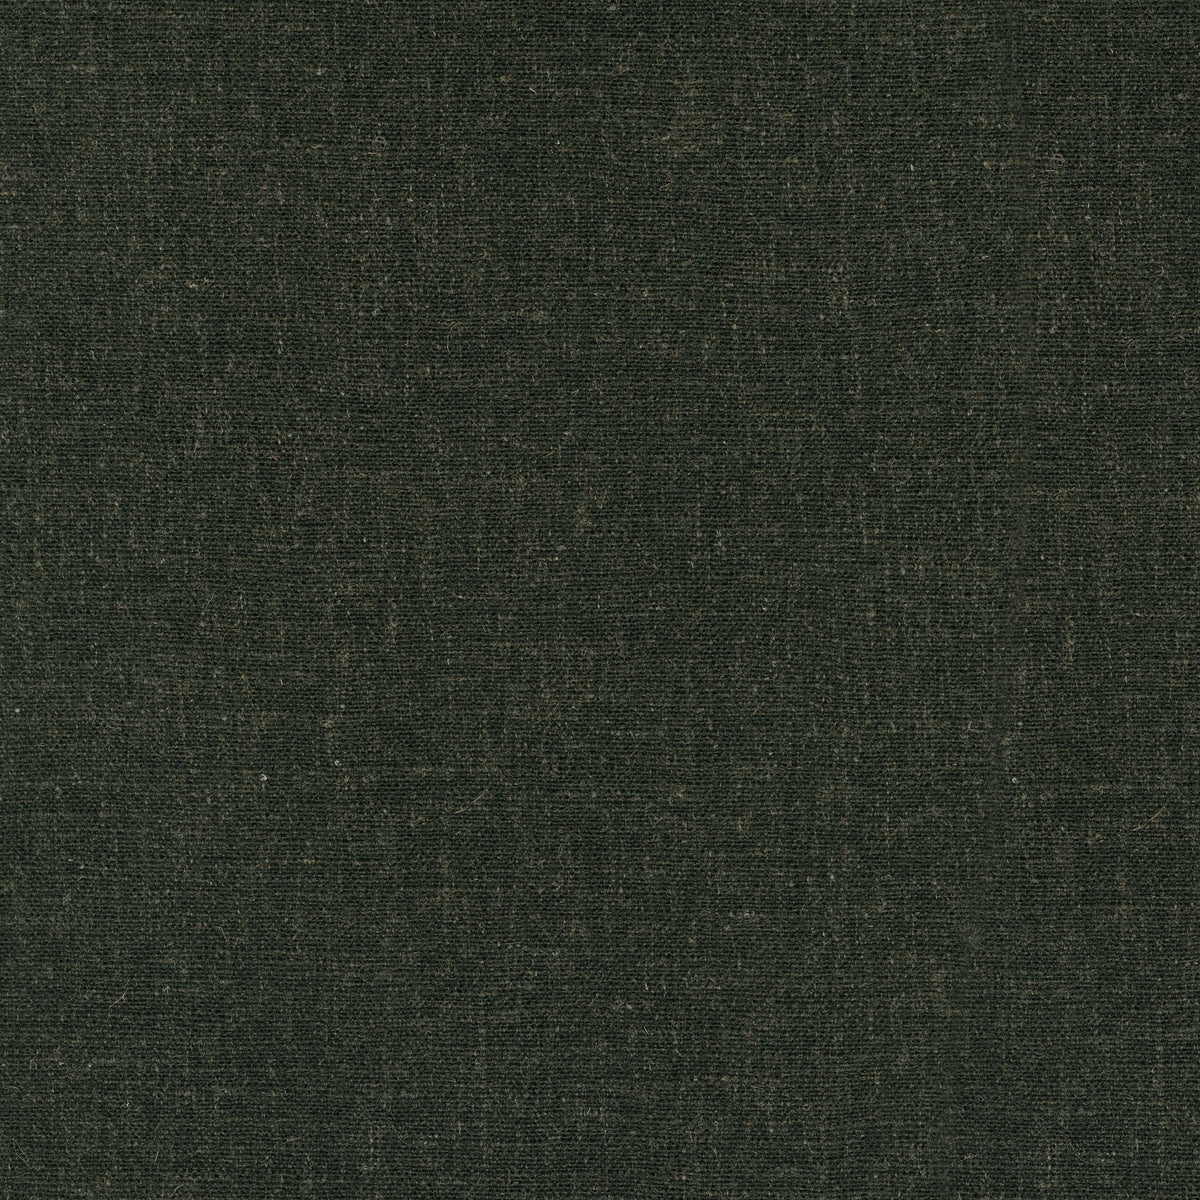 Performance + Miles - Sable 409046 Fabric Swatch